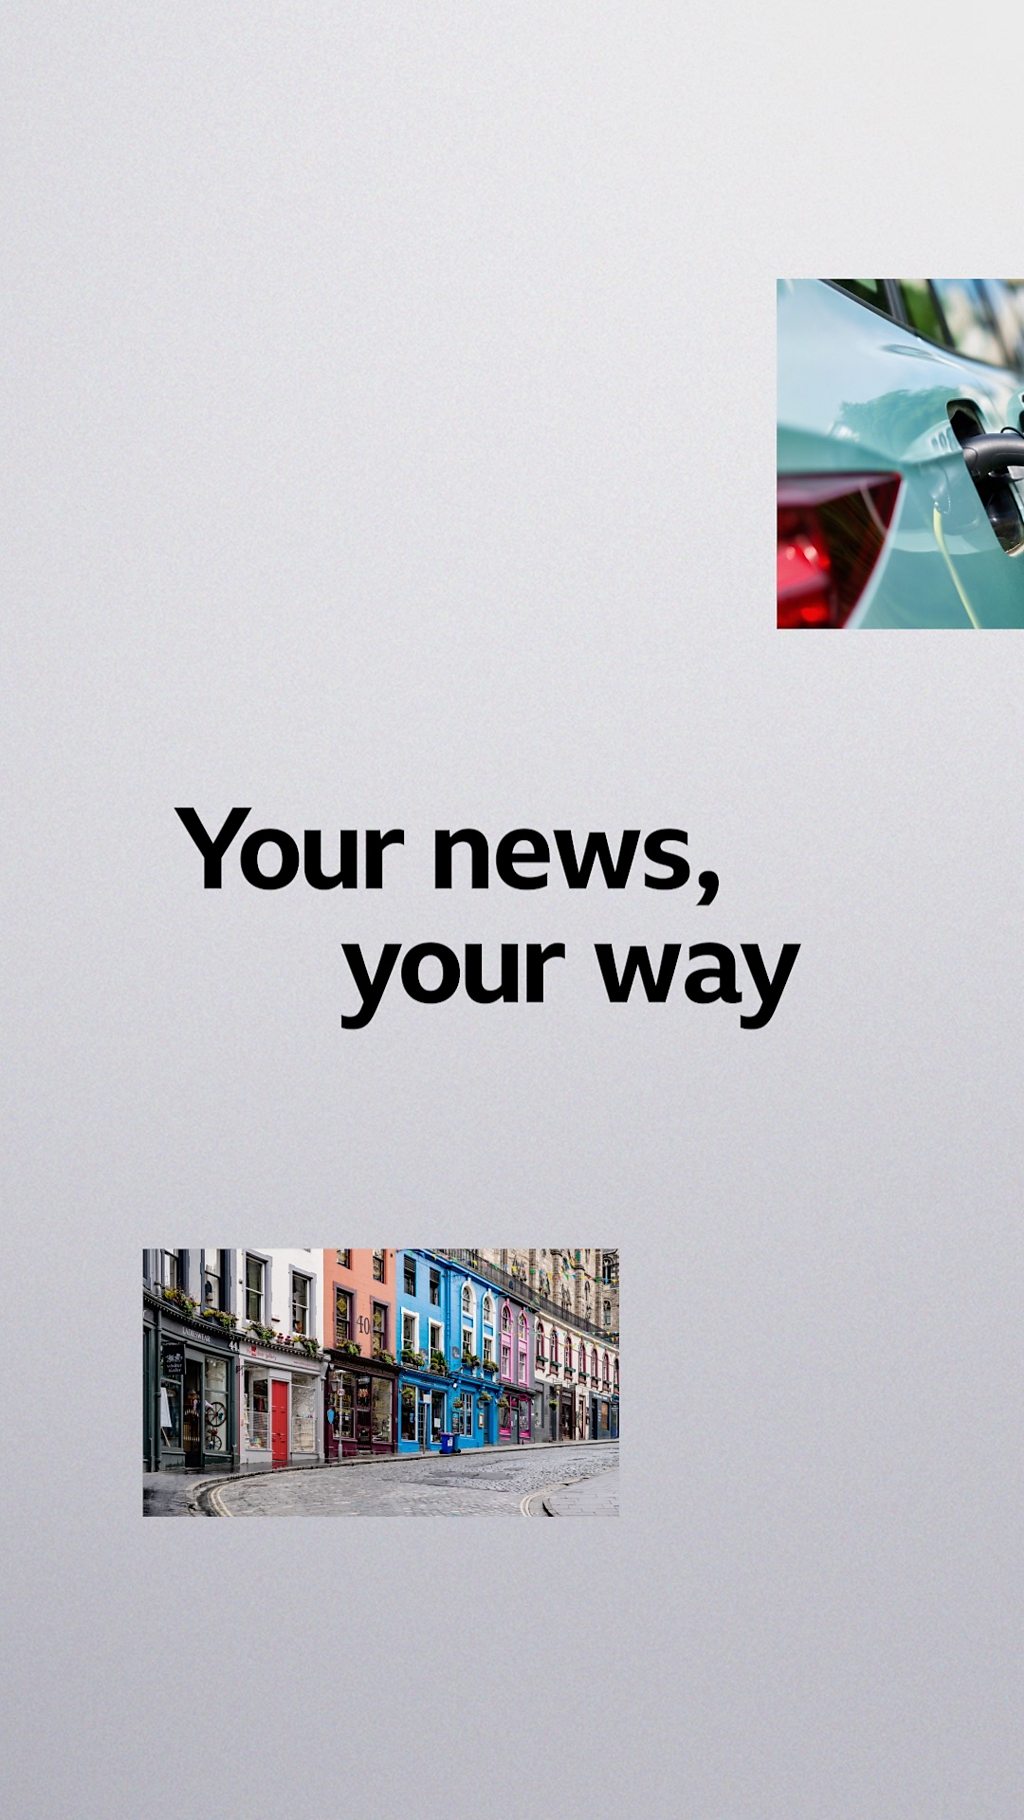 The words 'Your news, your way' alongside images of a car and a row of shops